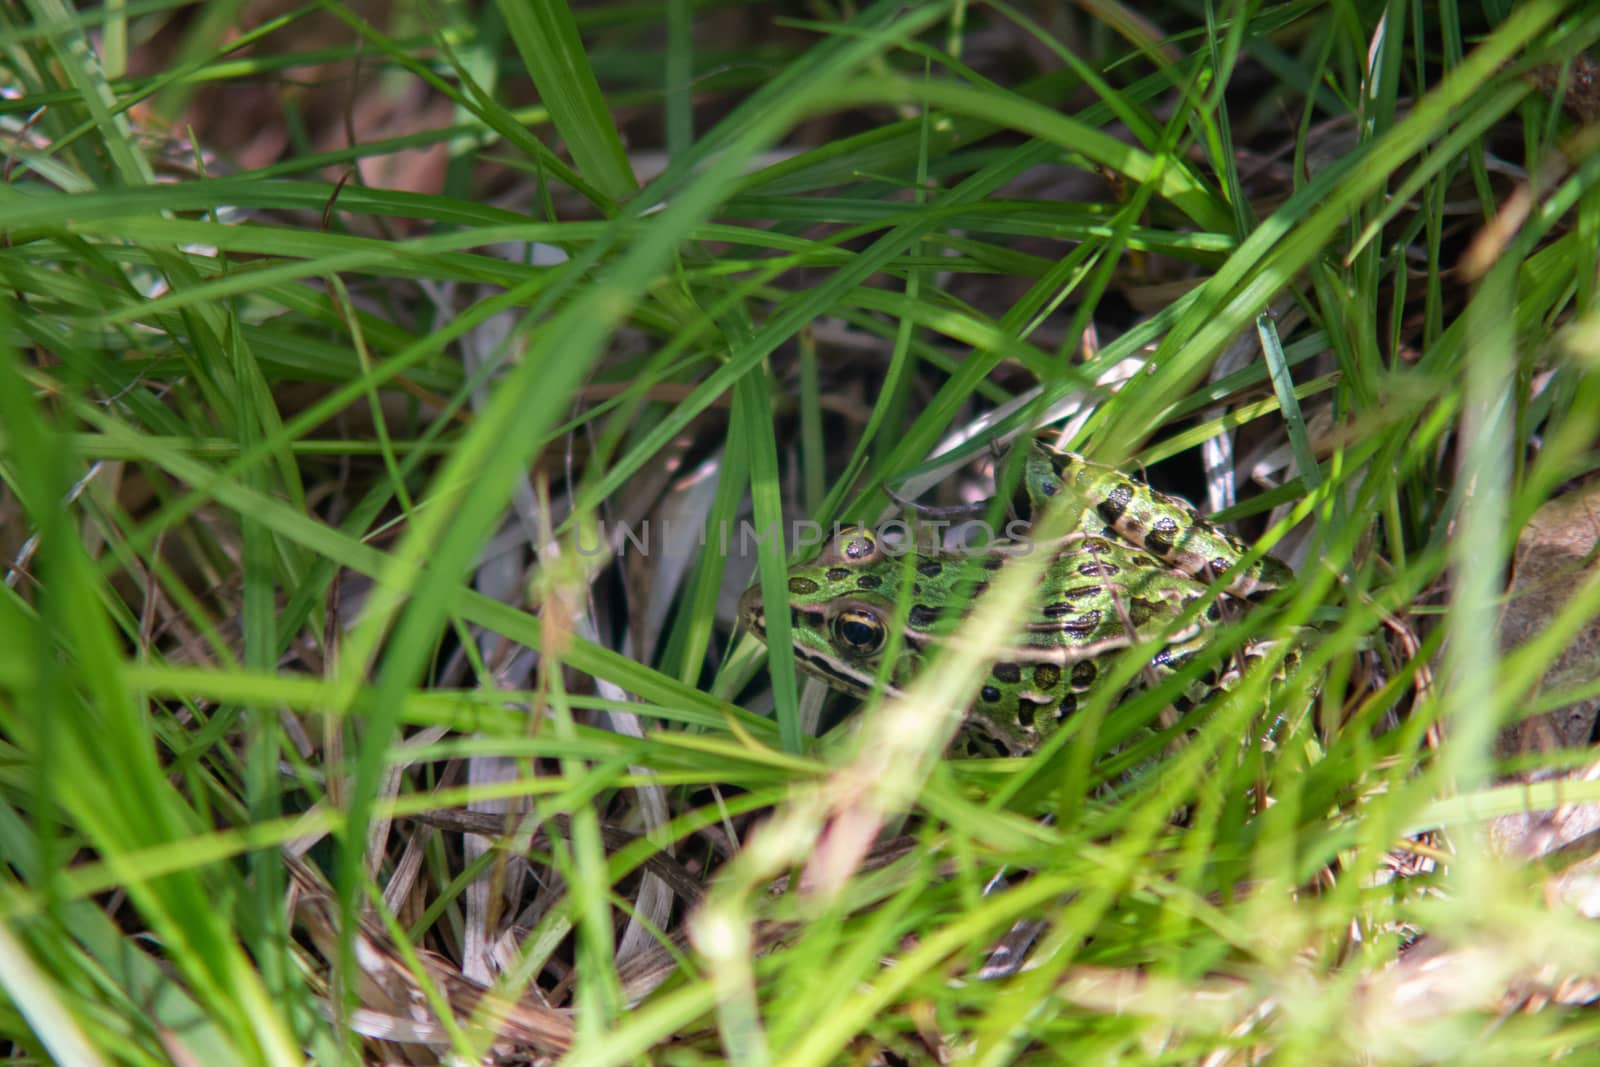 A northern leopard frog hides in green grass, camouflaged by the cover.